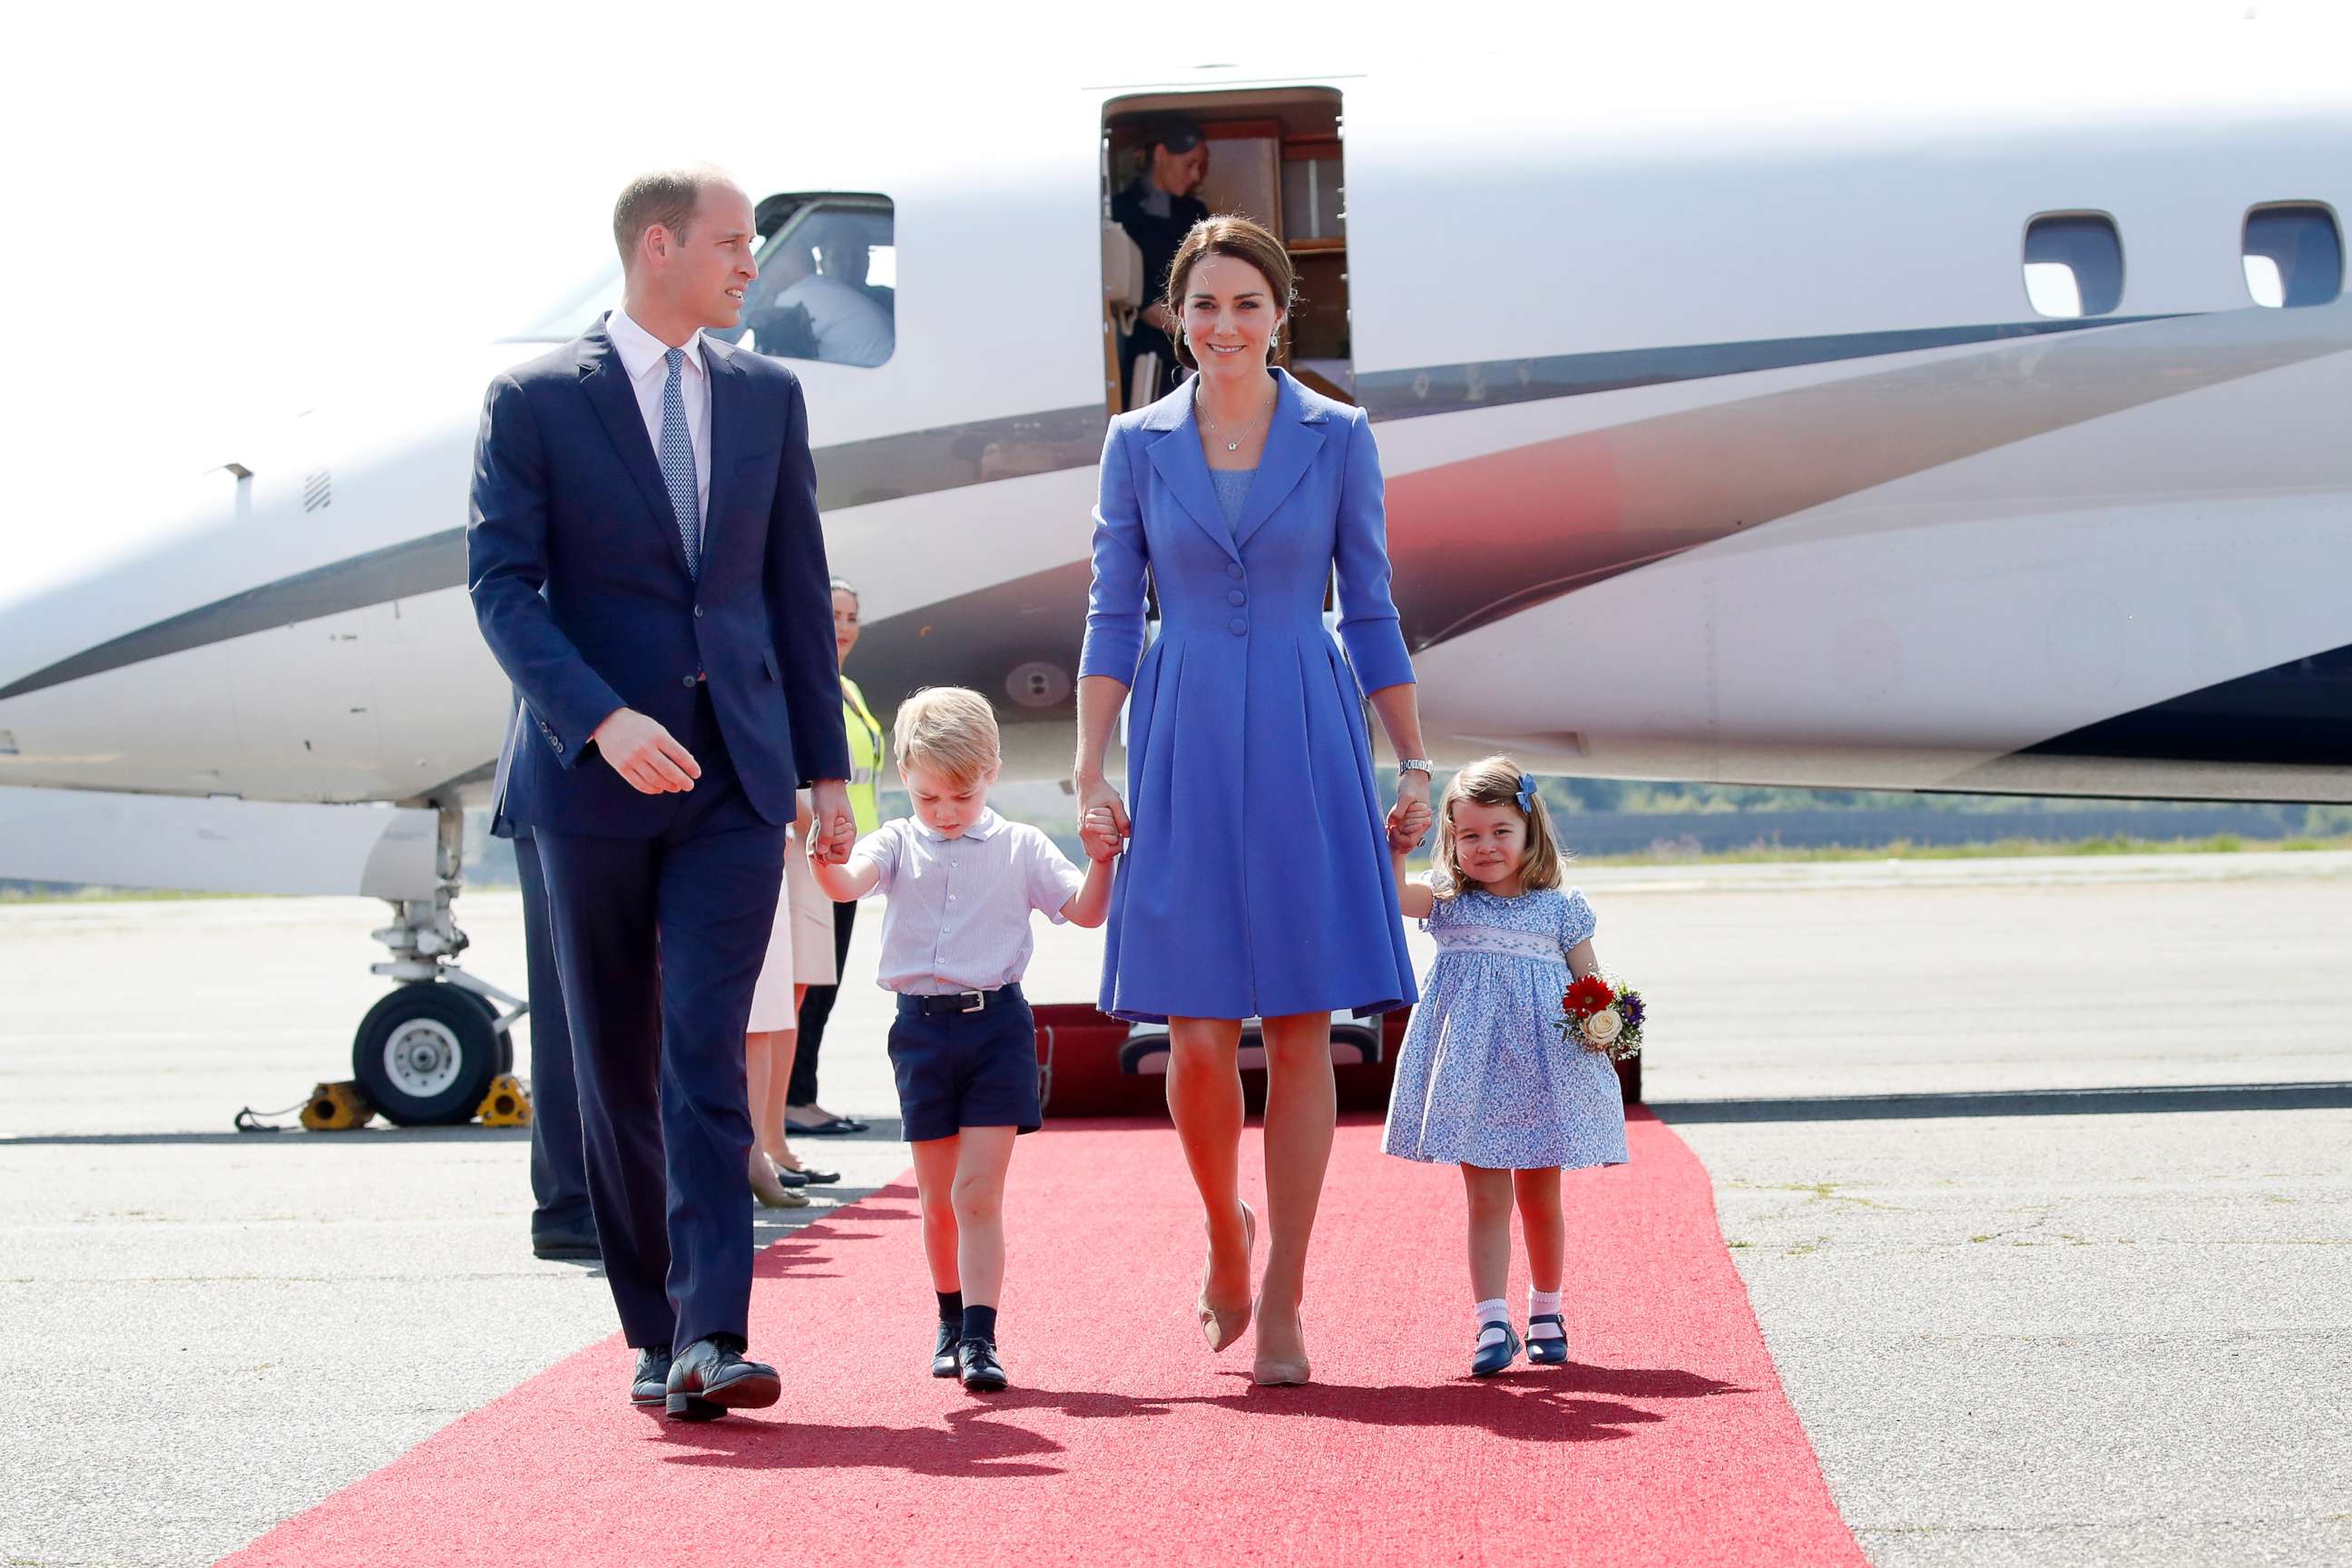 PHOTO: Prince William, Duke of Cambridge, Catherine, Duchess of Cambridge, Prince George of Cambridge and Princess Charlotte of Cambridge arrive at Berlin Tegel Airport during an official visit to Poland and Germany on July 19, 2017 in Berlin.